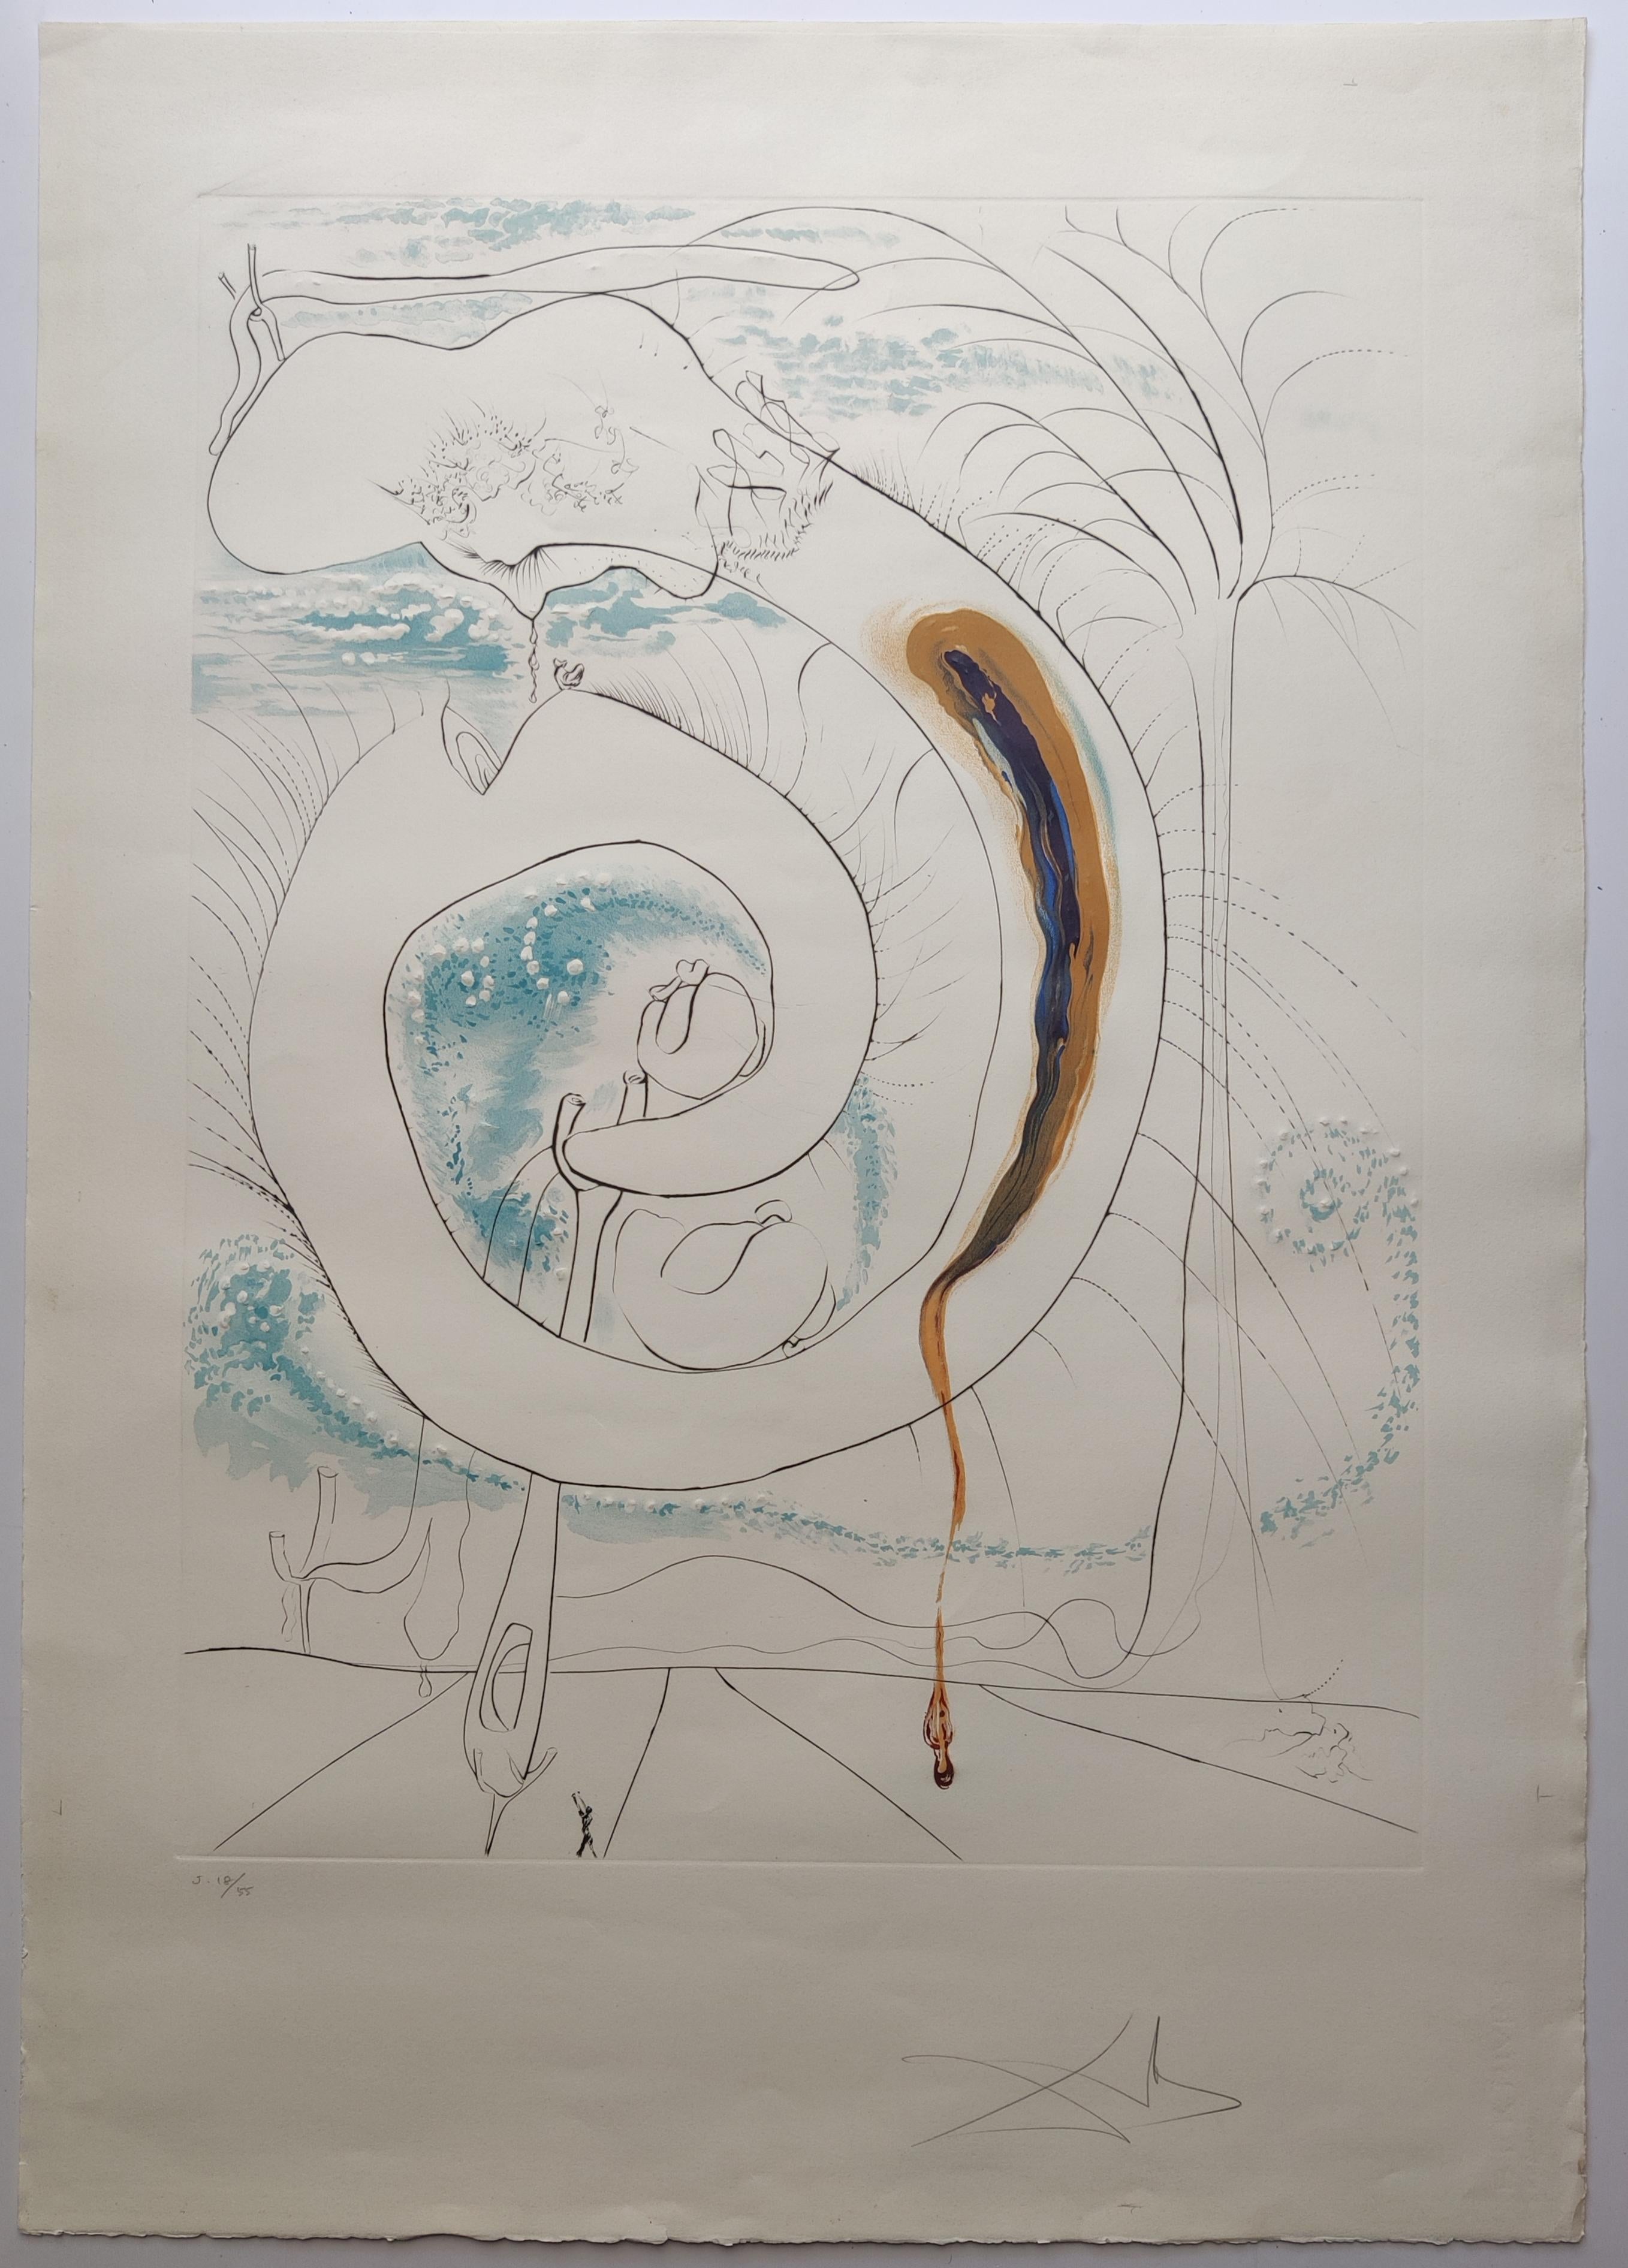 Salvador Dali
Le Cercle viscéral du cosmos from the La Conquête du Cosmos portfolio, 1974
Lithography 
Hand signed in pencil lower right 
Edition J 18/55 lower left.   
Sheet size: 100 x 70 cm.
Printed by Atelier Lithographique, Paris.
Drypoint